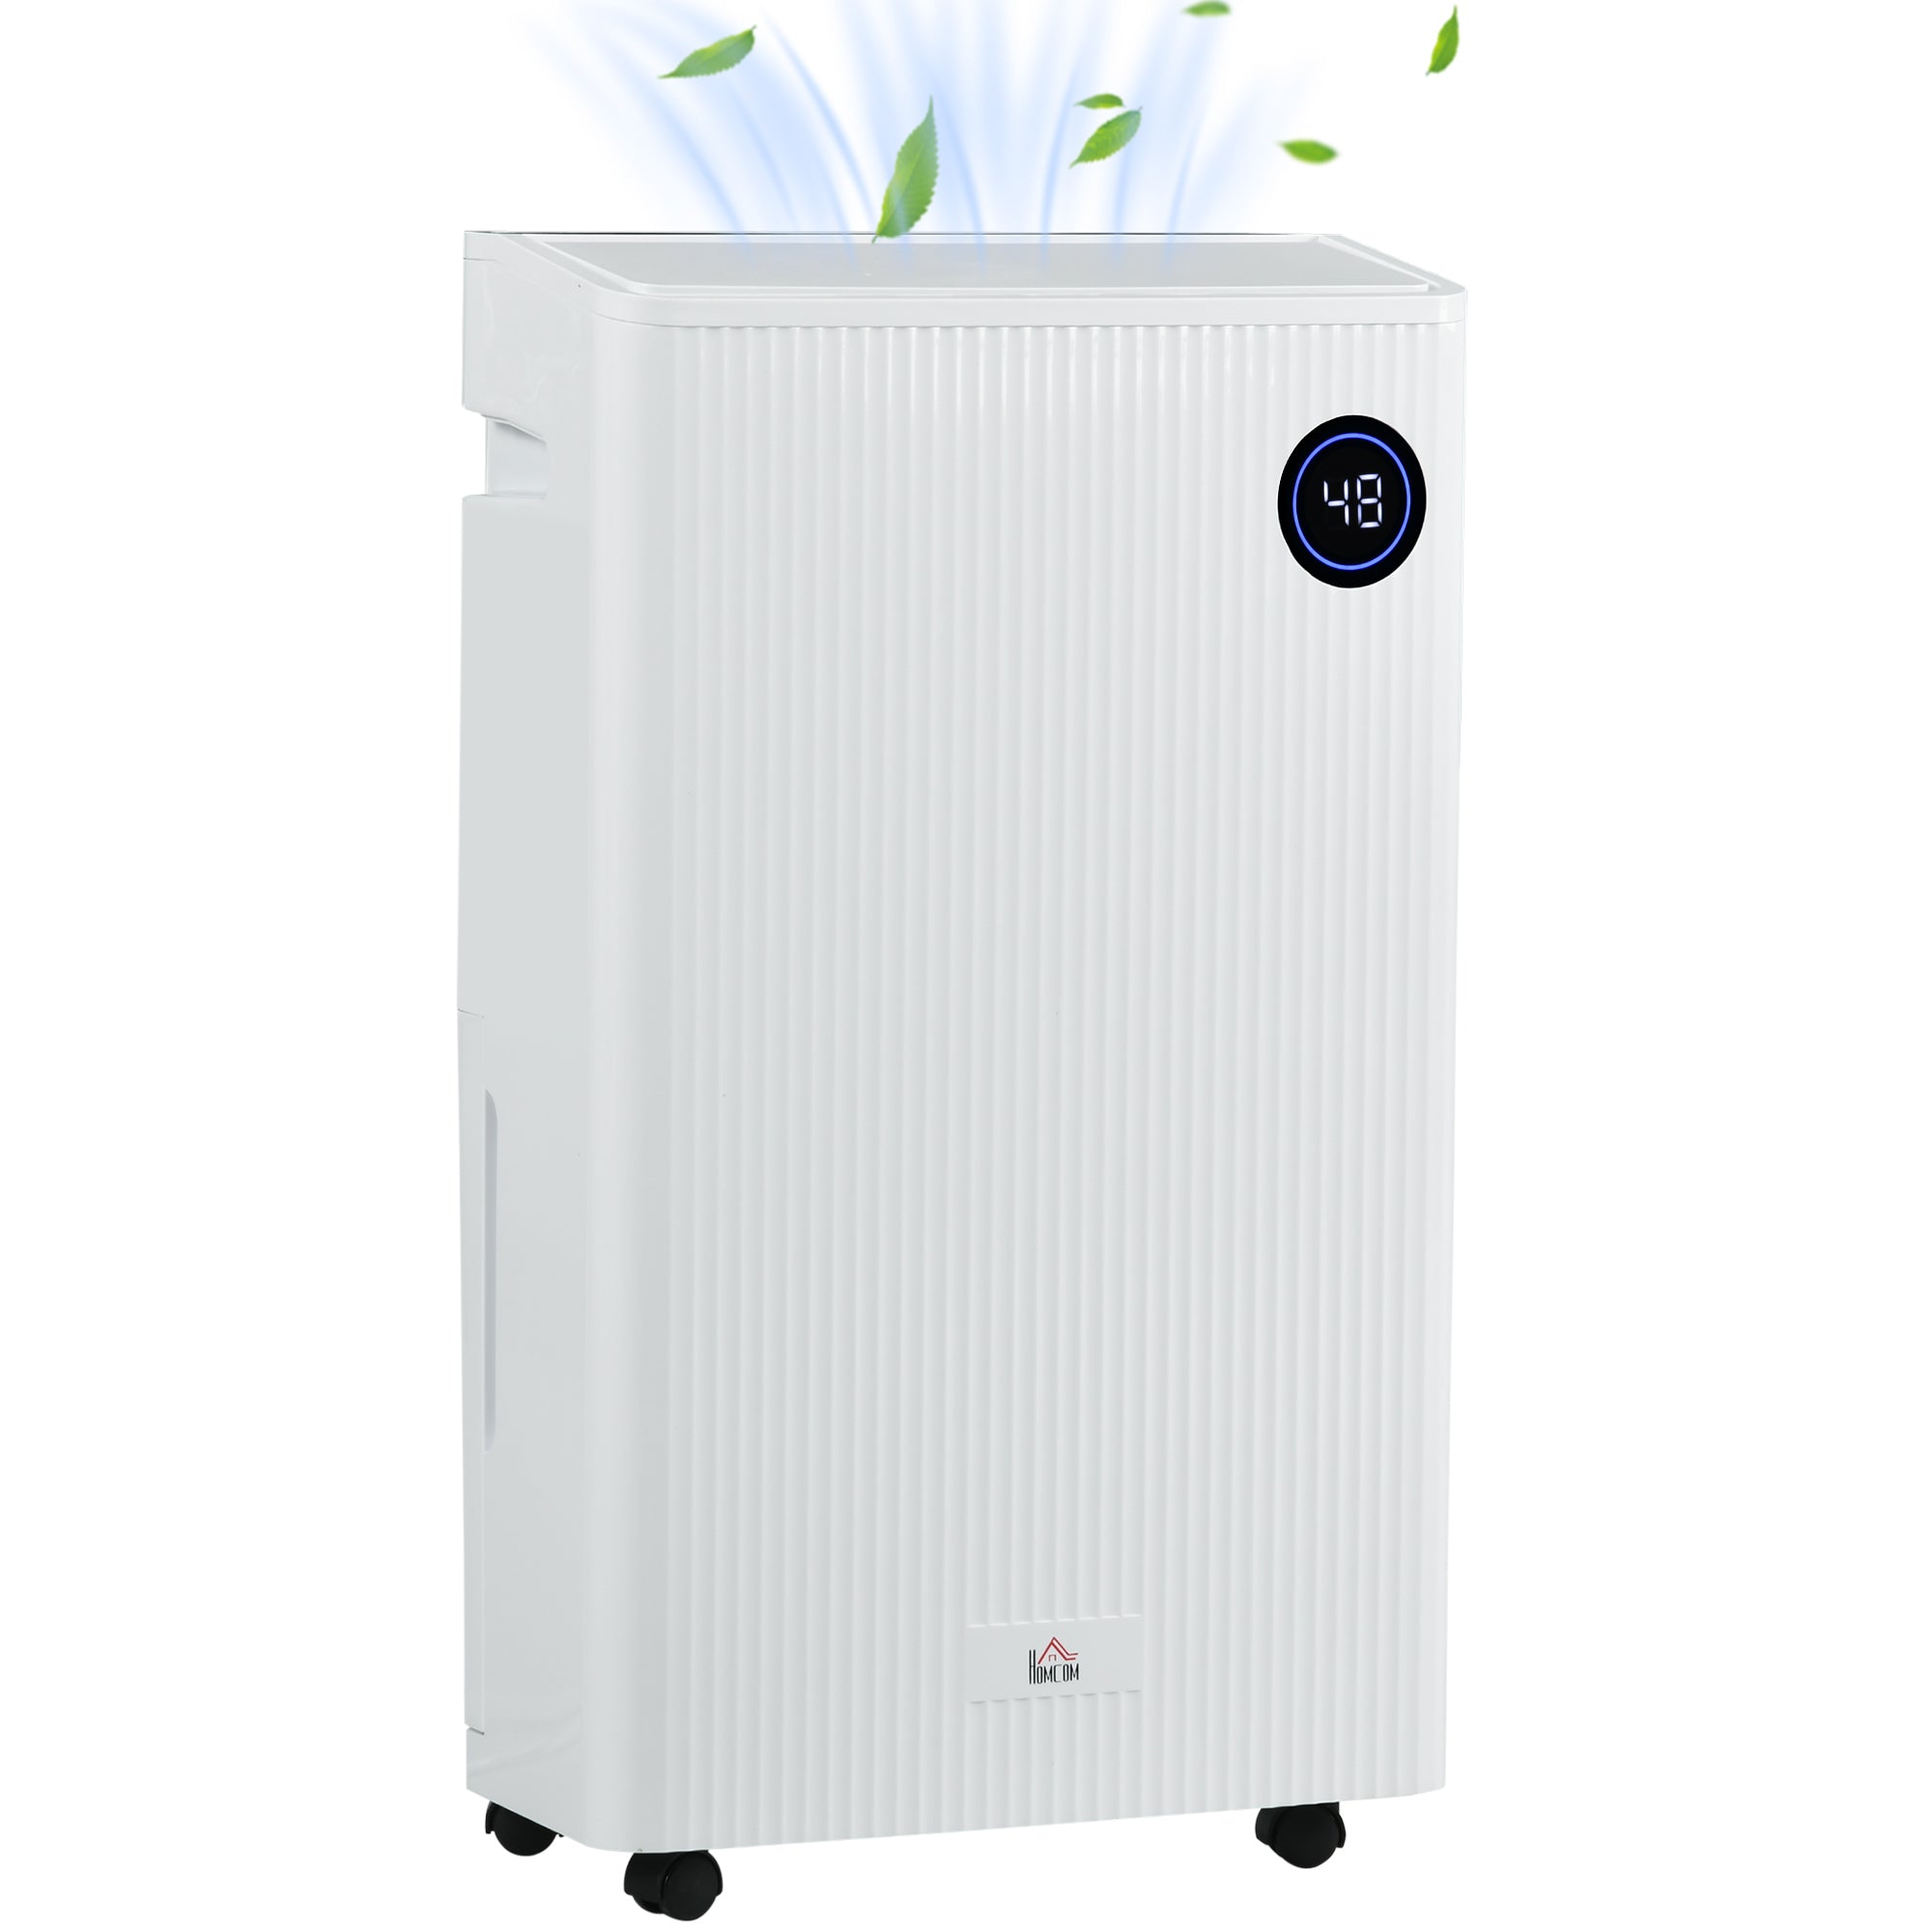 HOMCOM 16L/Day Dehumidifier with Air Purifier and HEPA Filter, UVC, Ioniser, 5.5L Water Tank, 24H Timer, for Home Damp, Condensation, Mould and Laundry Drying, White